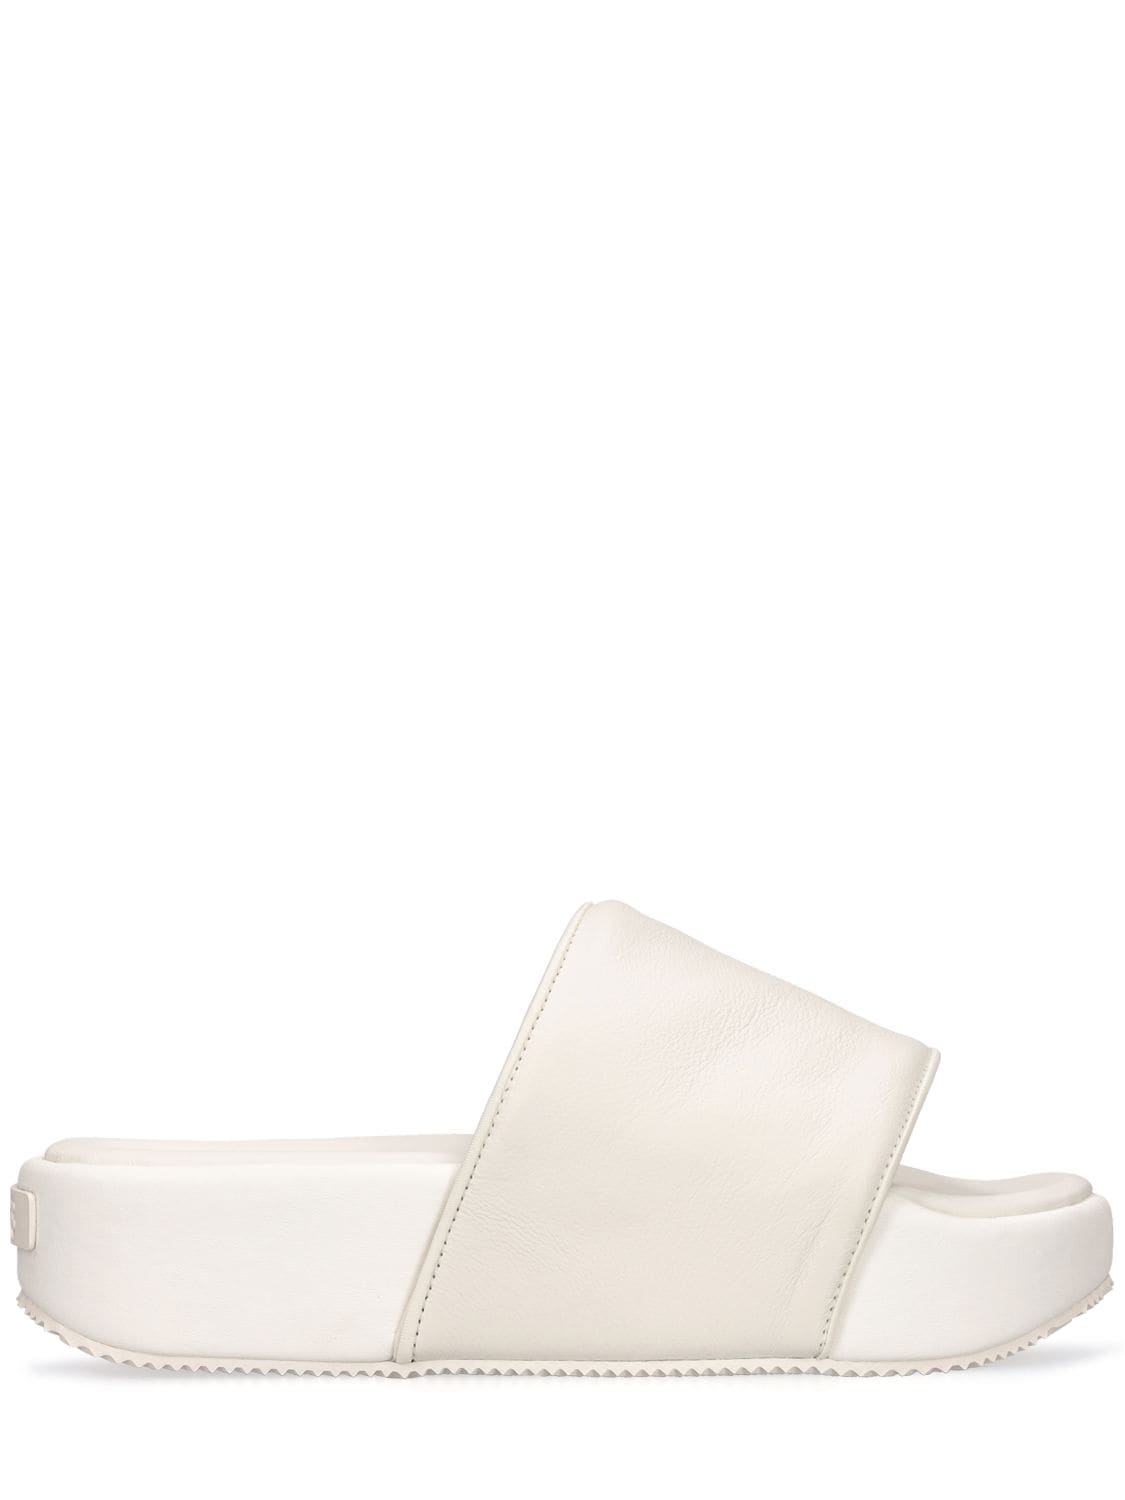 Y-3 CLASSIC LEATHER SLIDE WEDGES